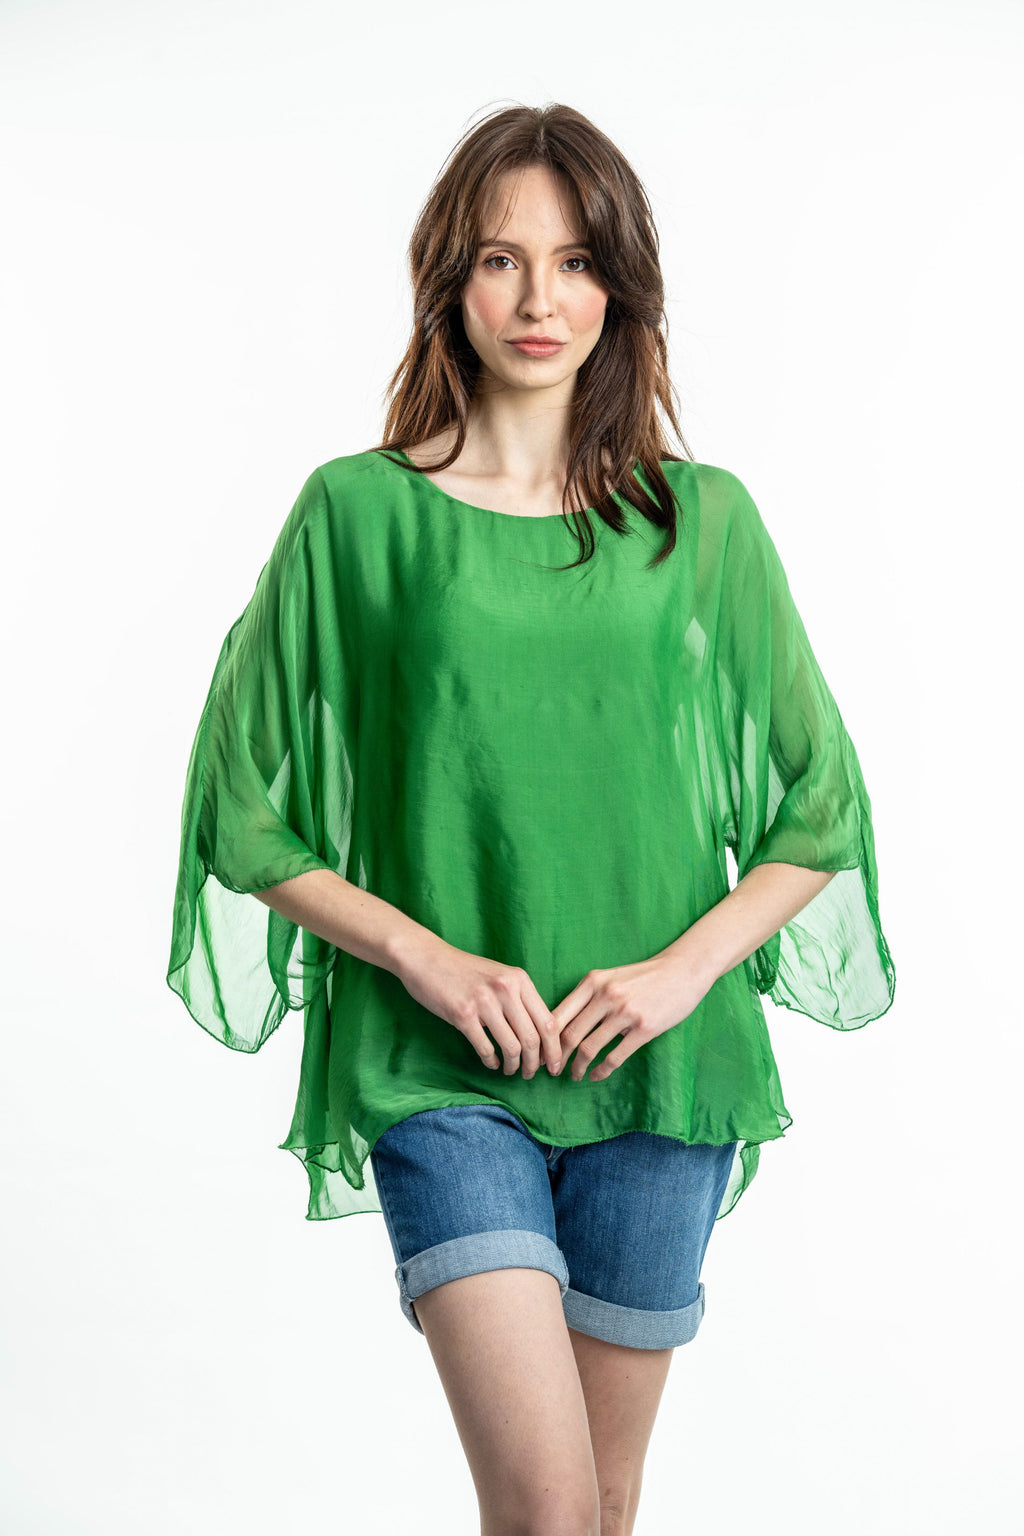 MARY S23 Green Silk Top